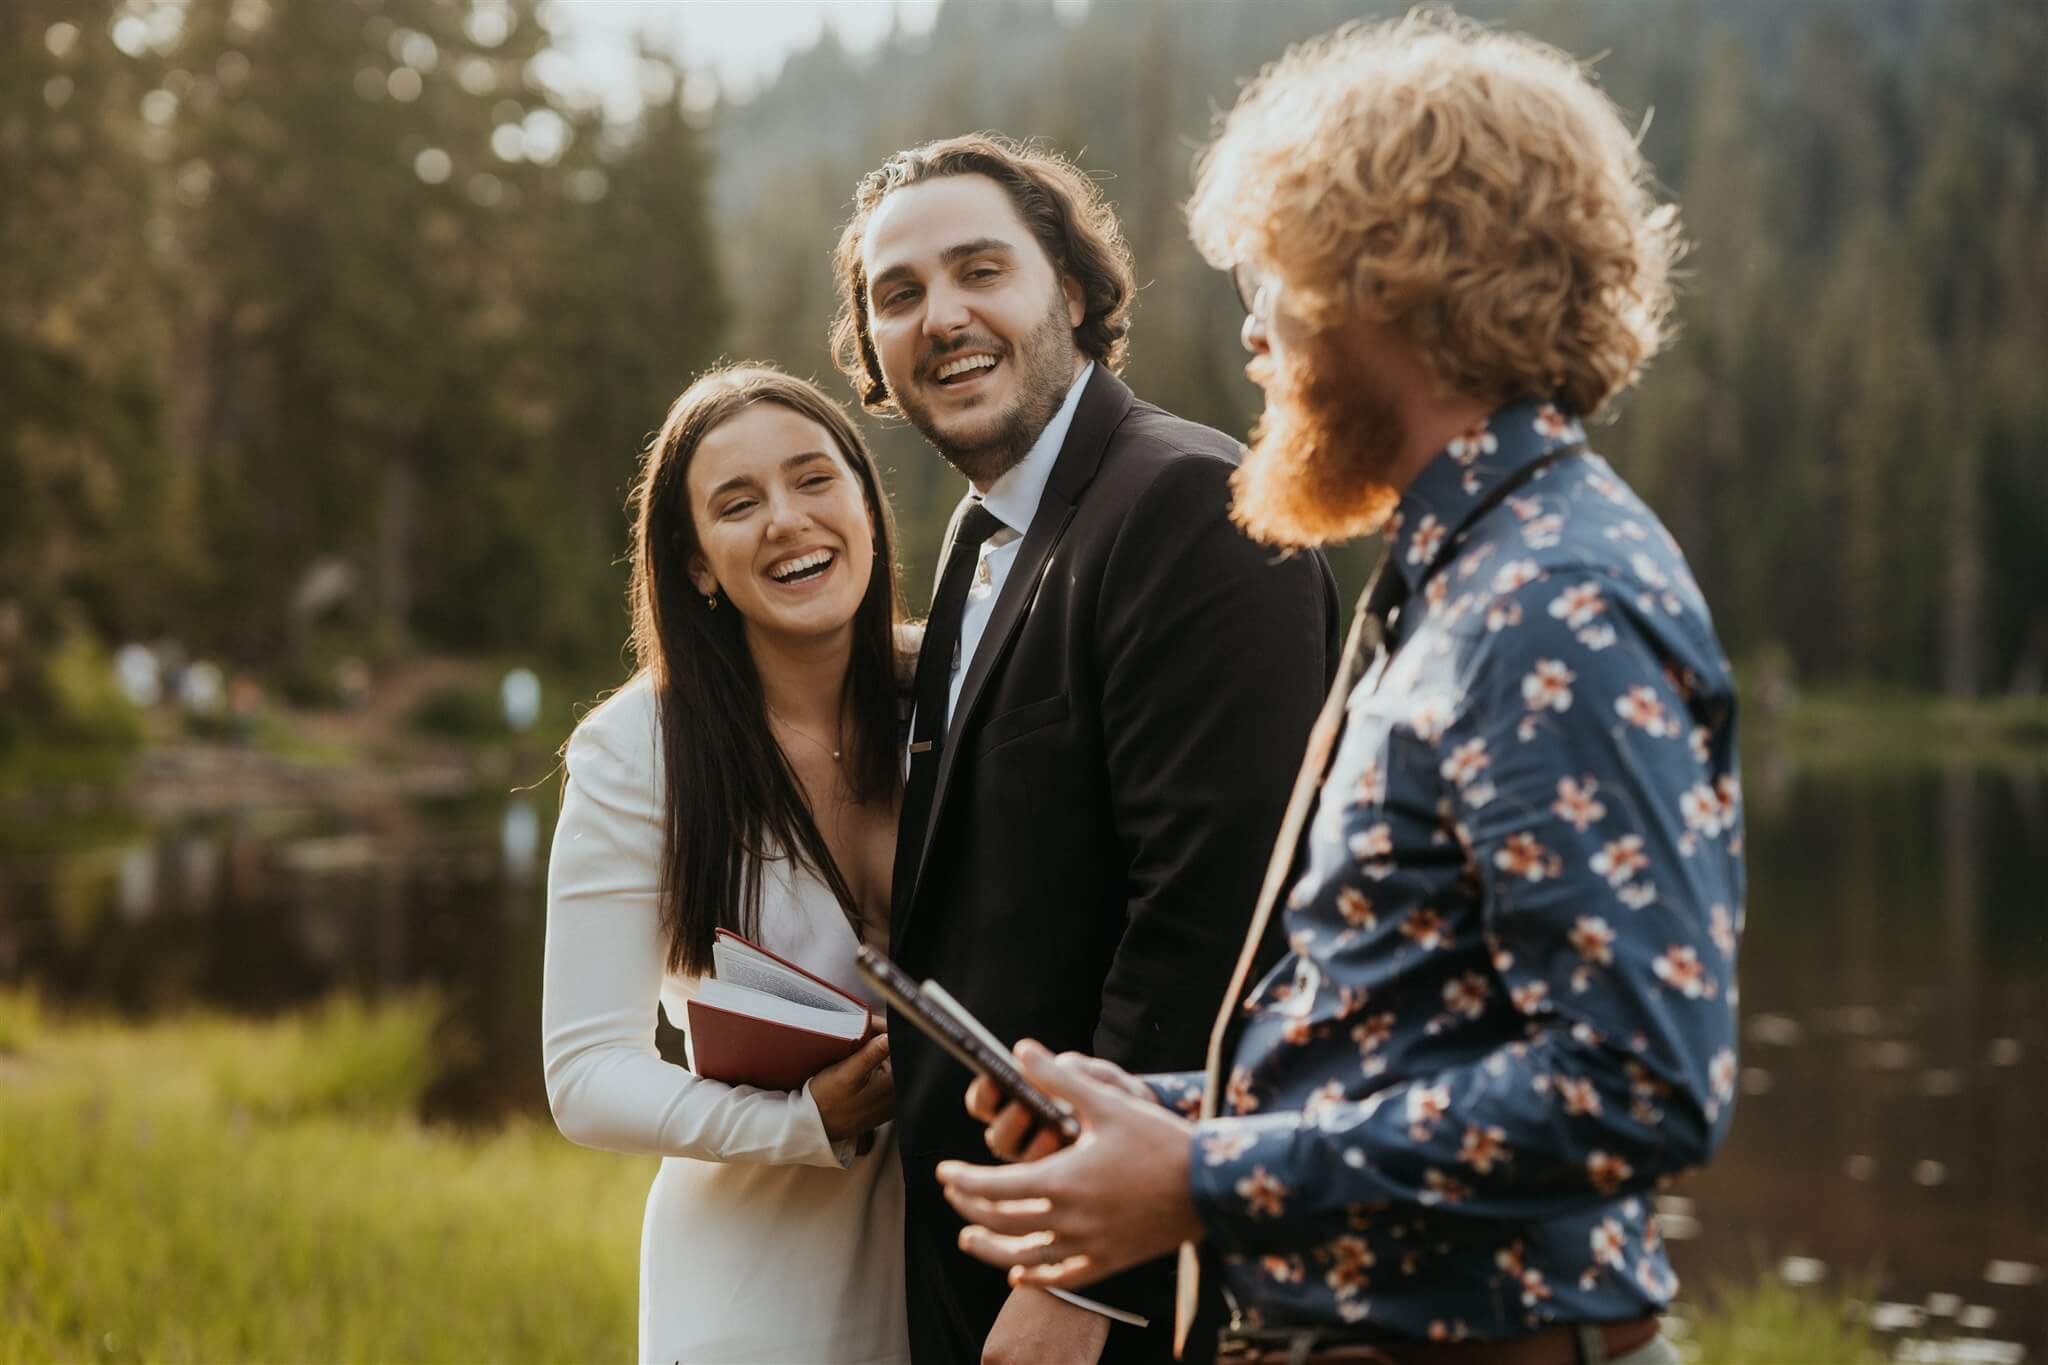 Bride and groom laugh while officiant speaks at outdoor wedding ceremony at Mt Rainier